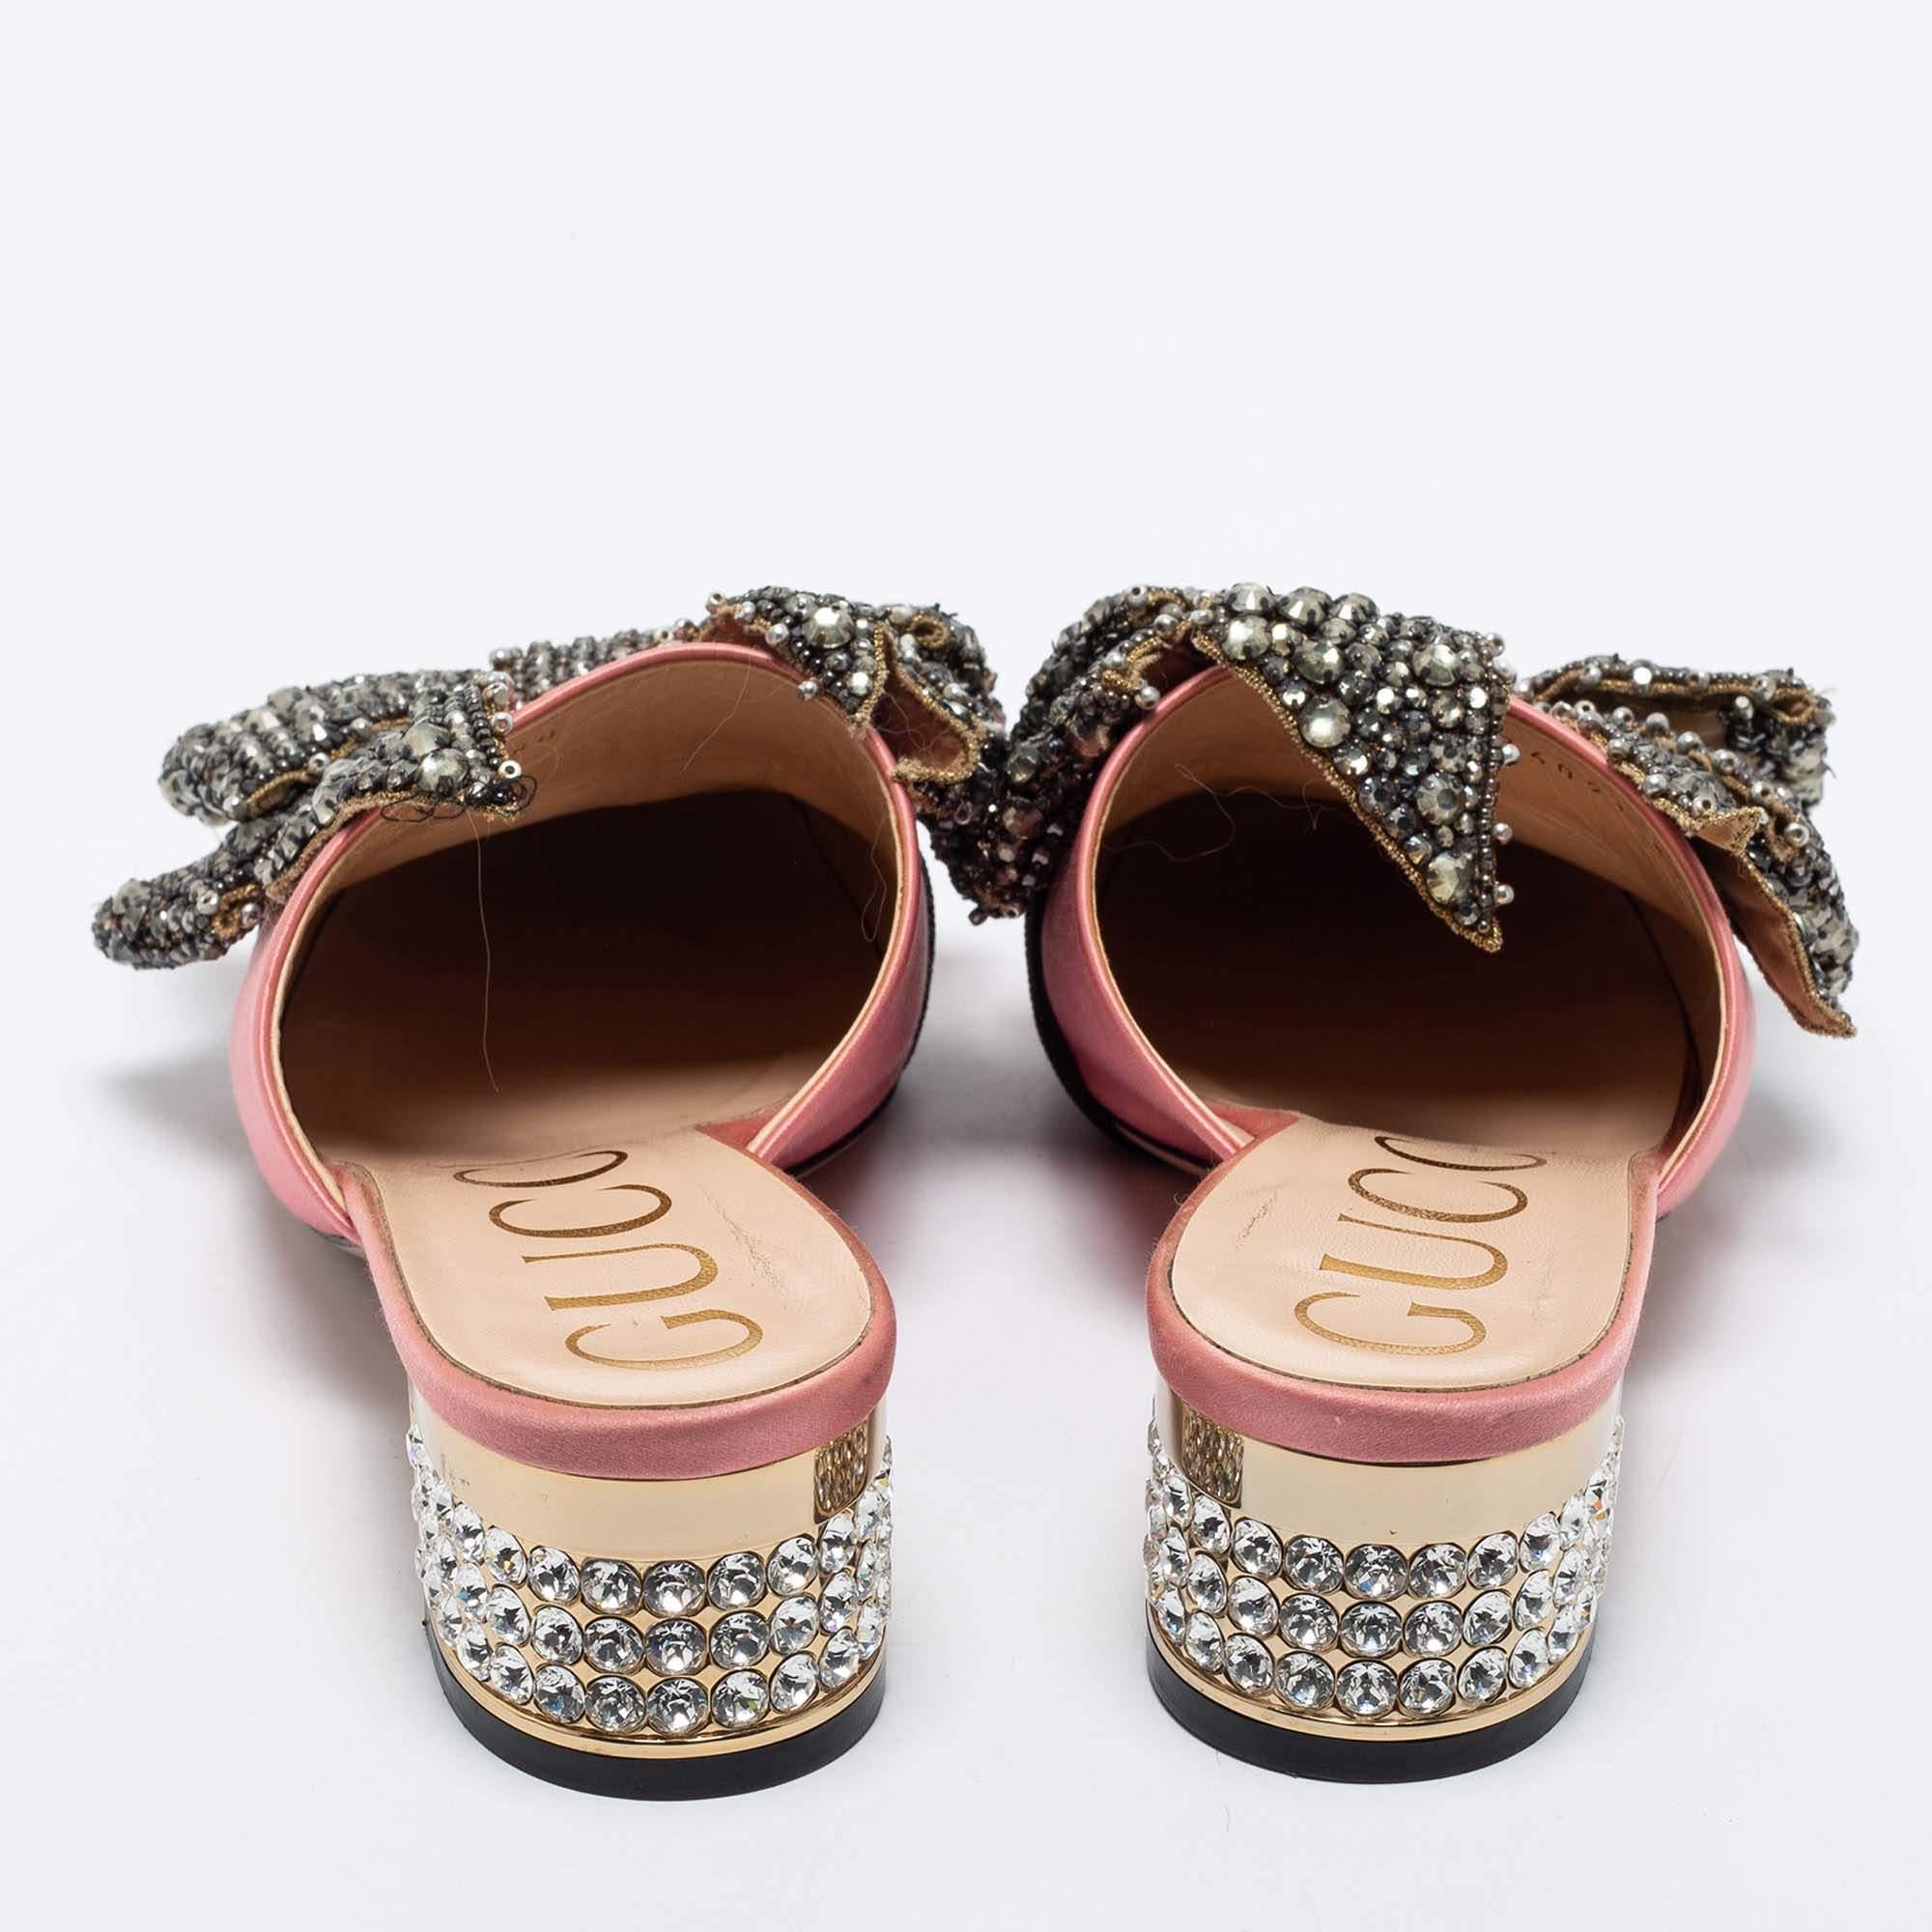 Gucci Pink Satin Crystal Embellished Bow Mules Size 37.5 3